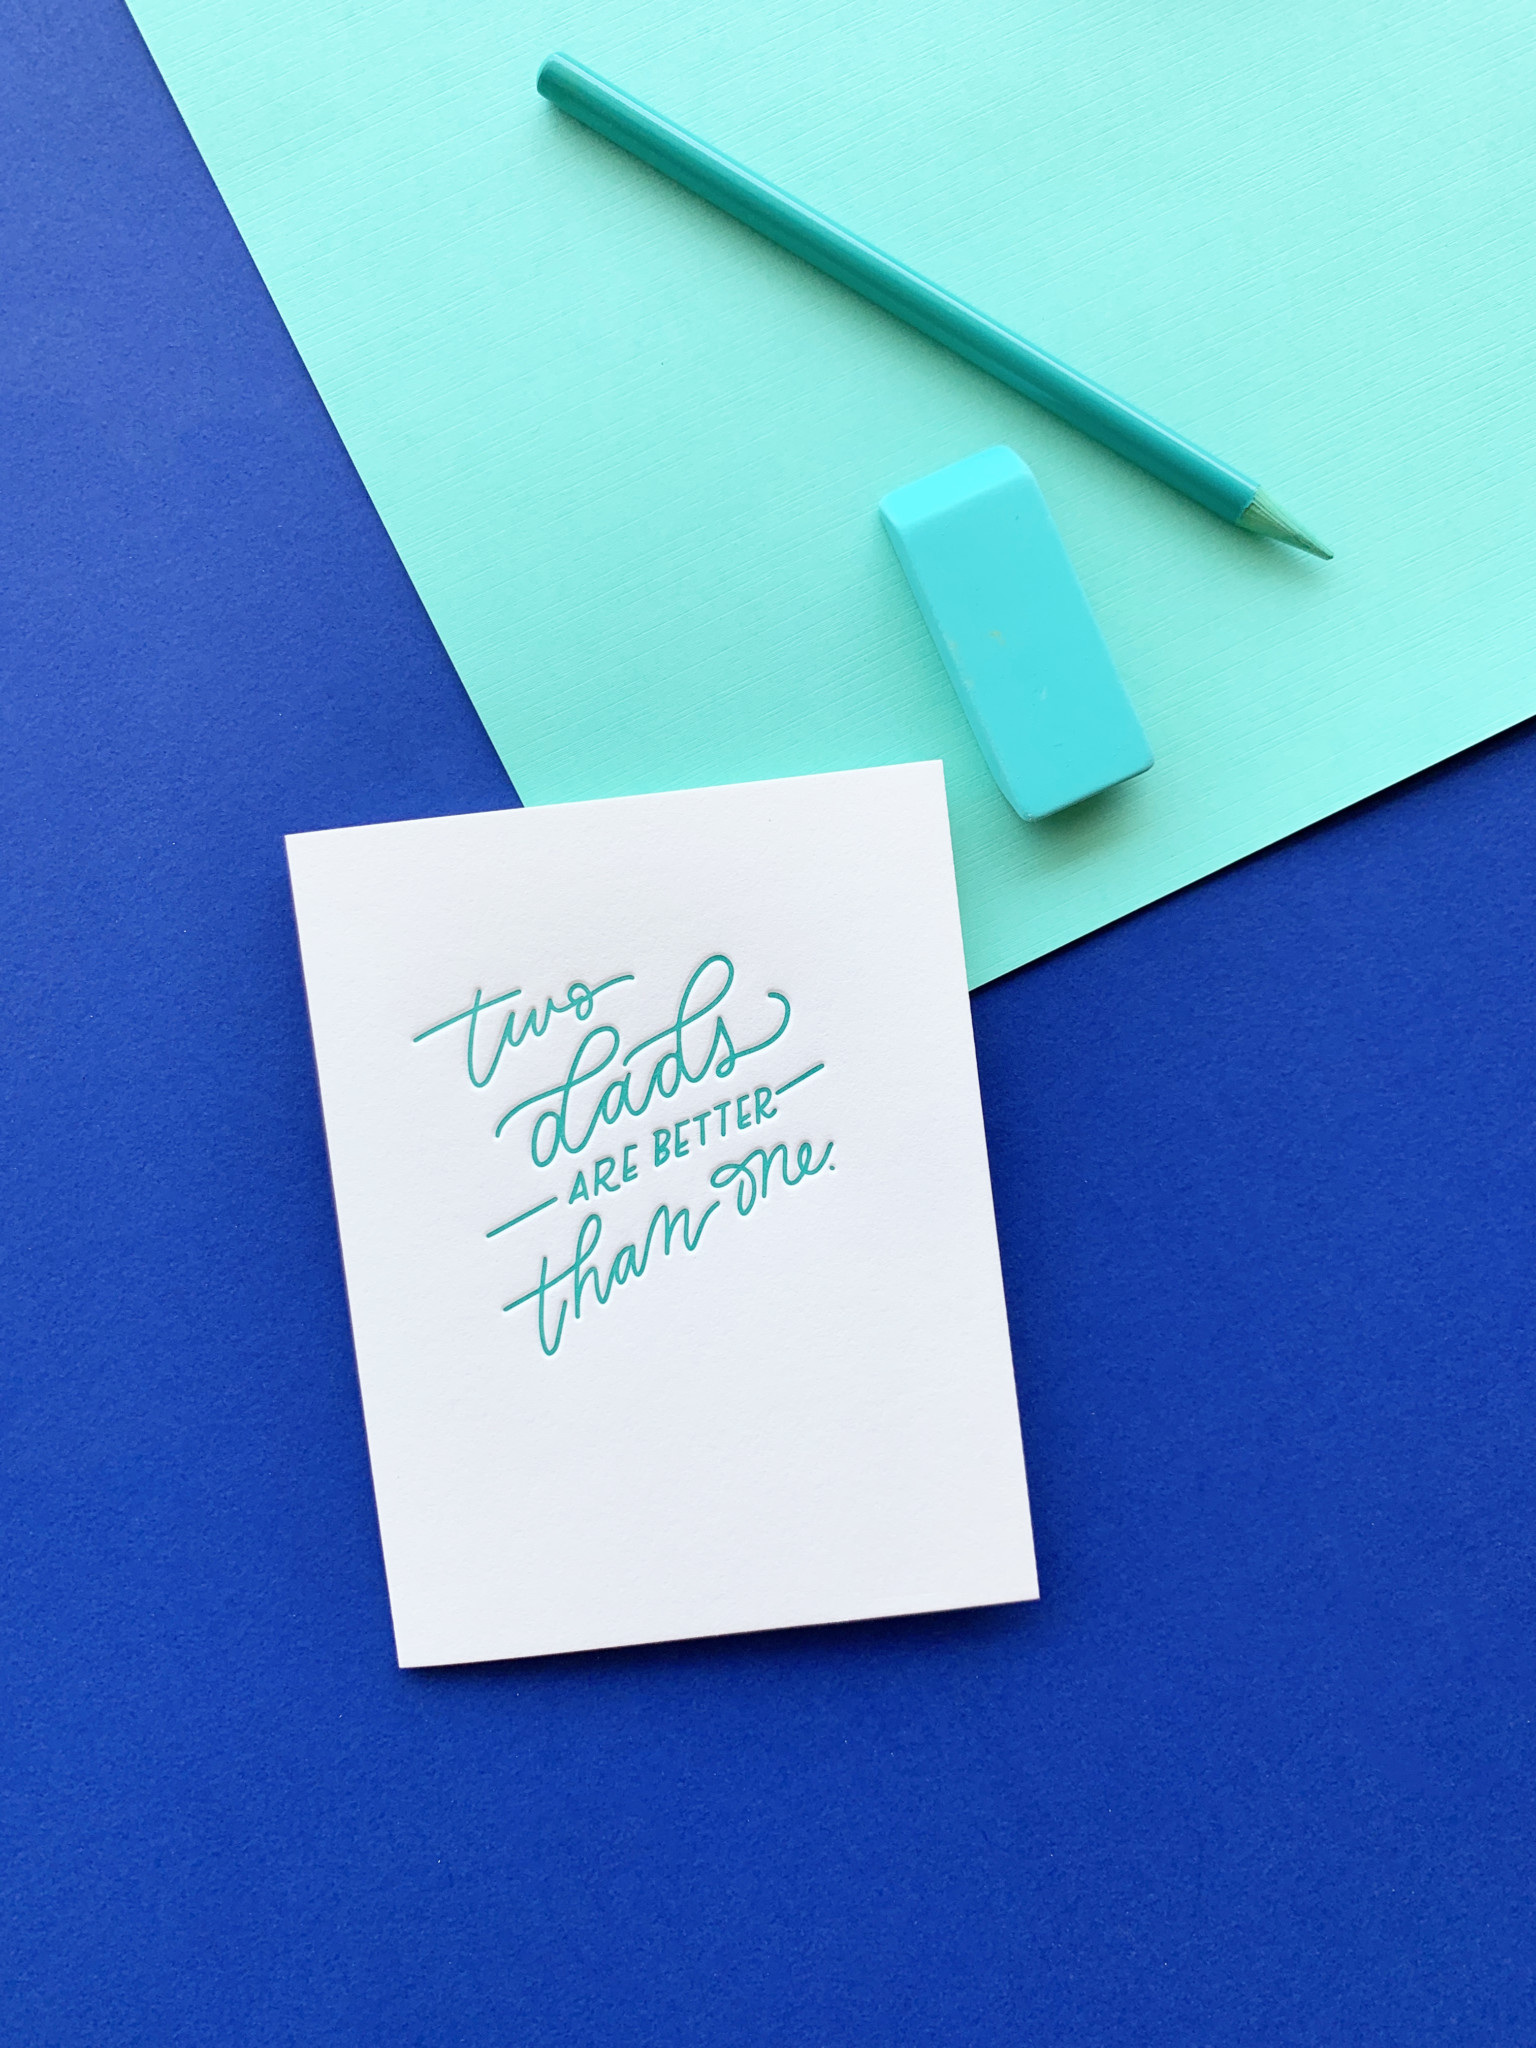 Two Dads Letterpress greeting card on layered blue paper background with eraser and pencil accents.